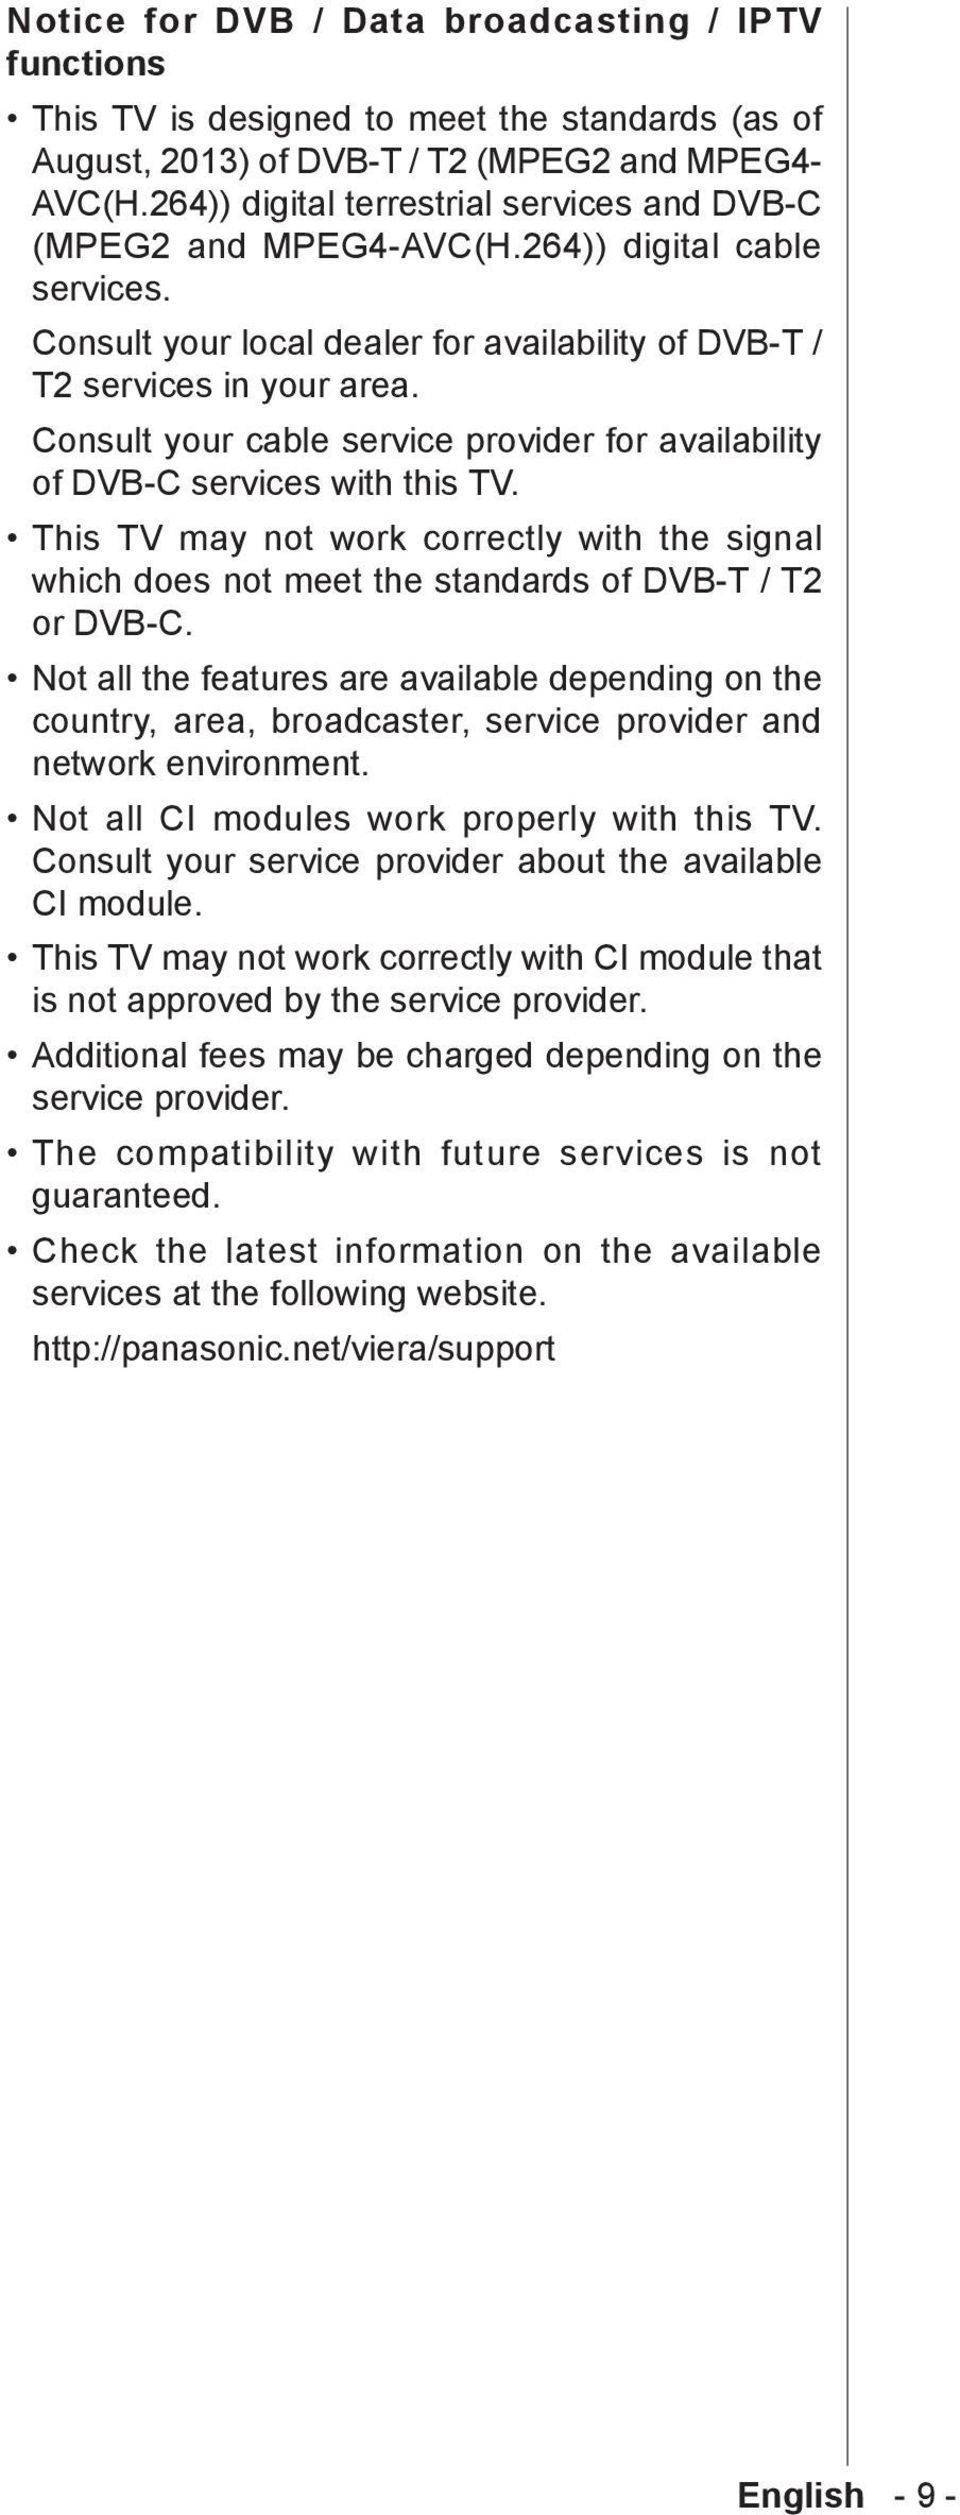 Consult your cable service provider for availability of DVB-C services with this TV. This TV may not work correctly with the signal which does not meet the standards of DVB-T / T2 or DVB-C.